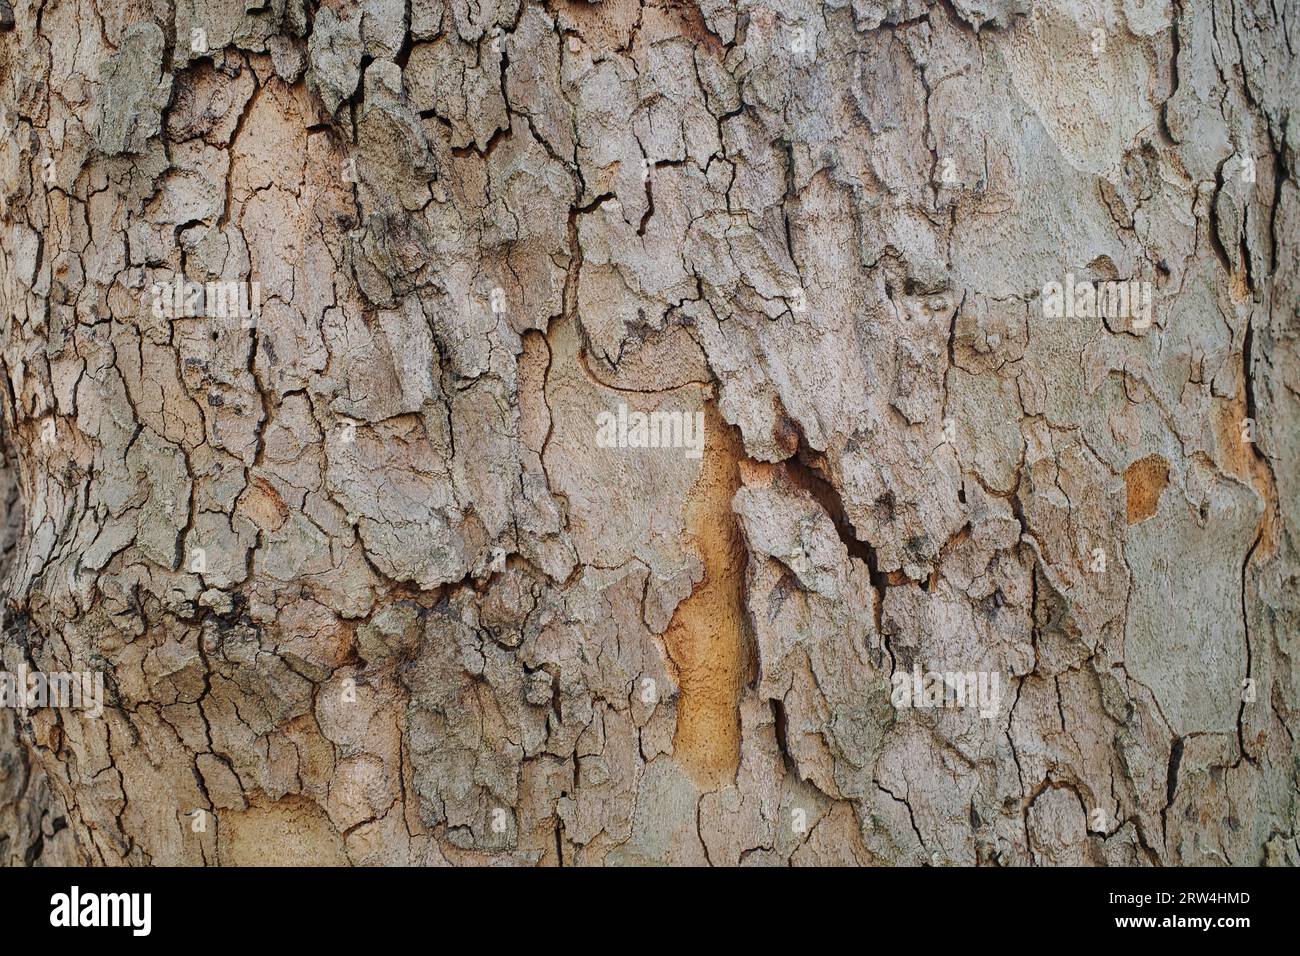 Tree bark as background, Abstract structure, North Rhine-Westphalia, Germany Stock Photo